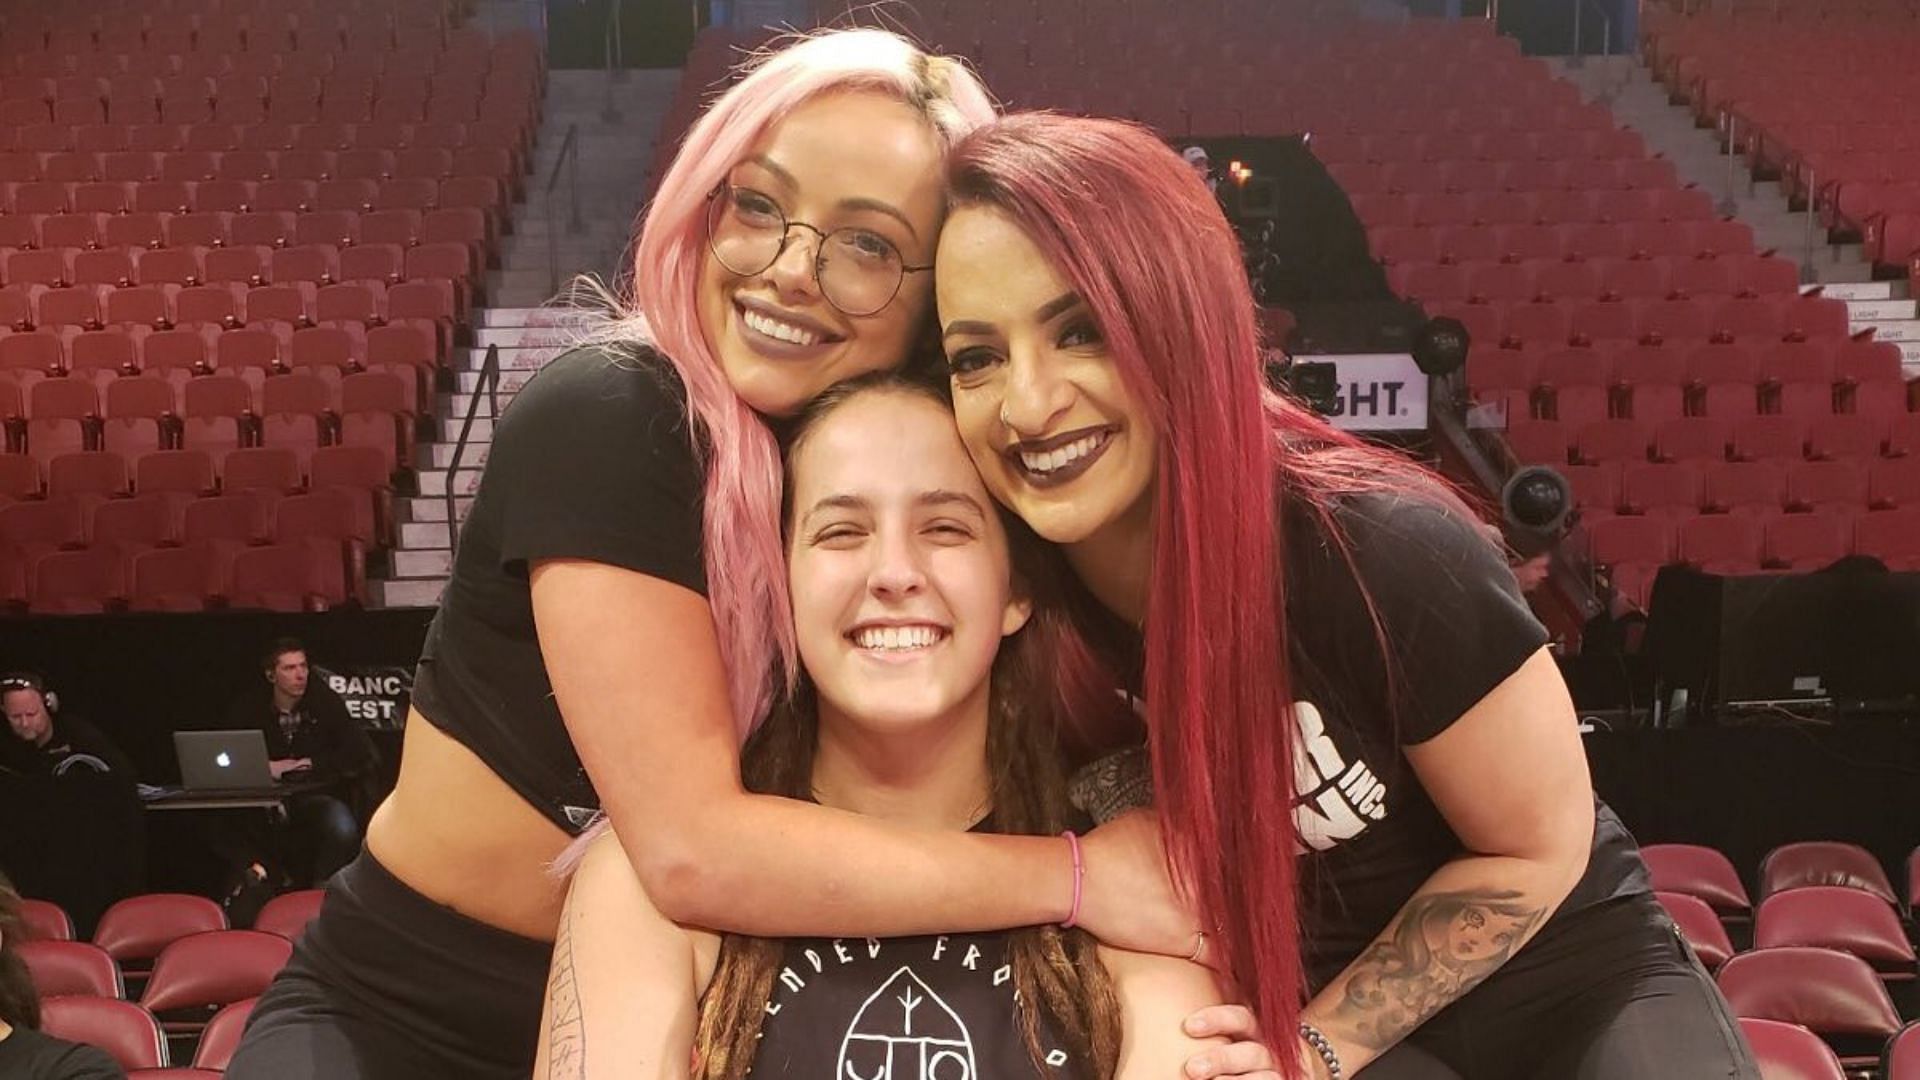 The Riott Squad were a former WWE faction that consisted of Ruby Riott, Liv Morgan, and Sarah Logan